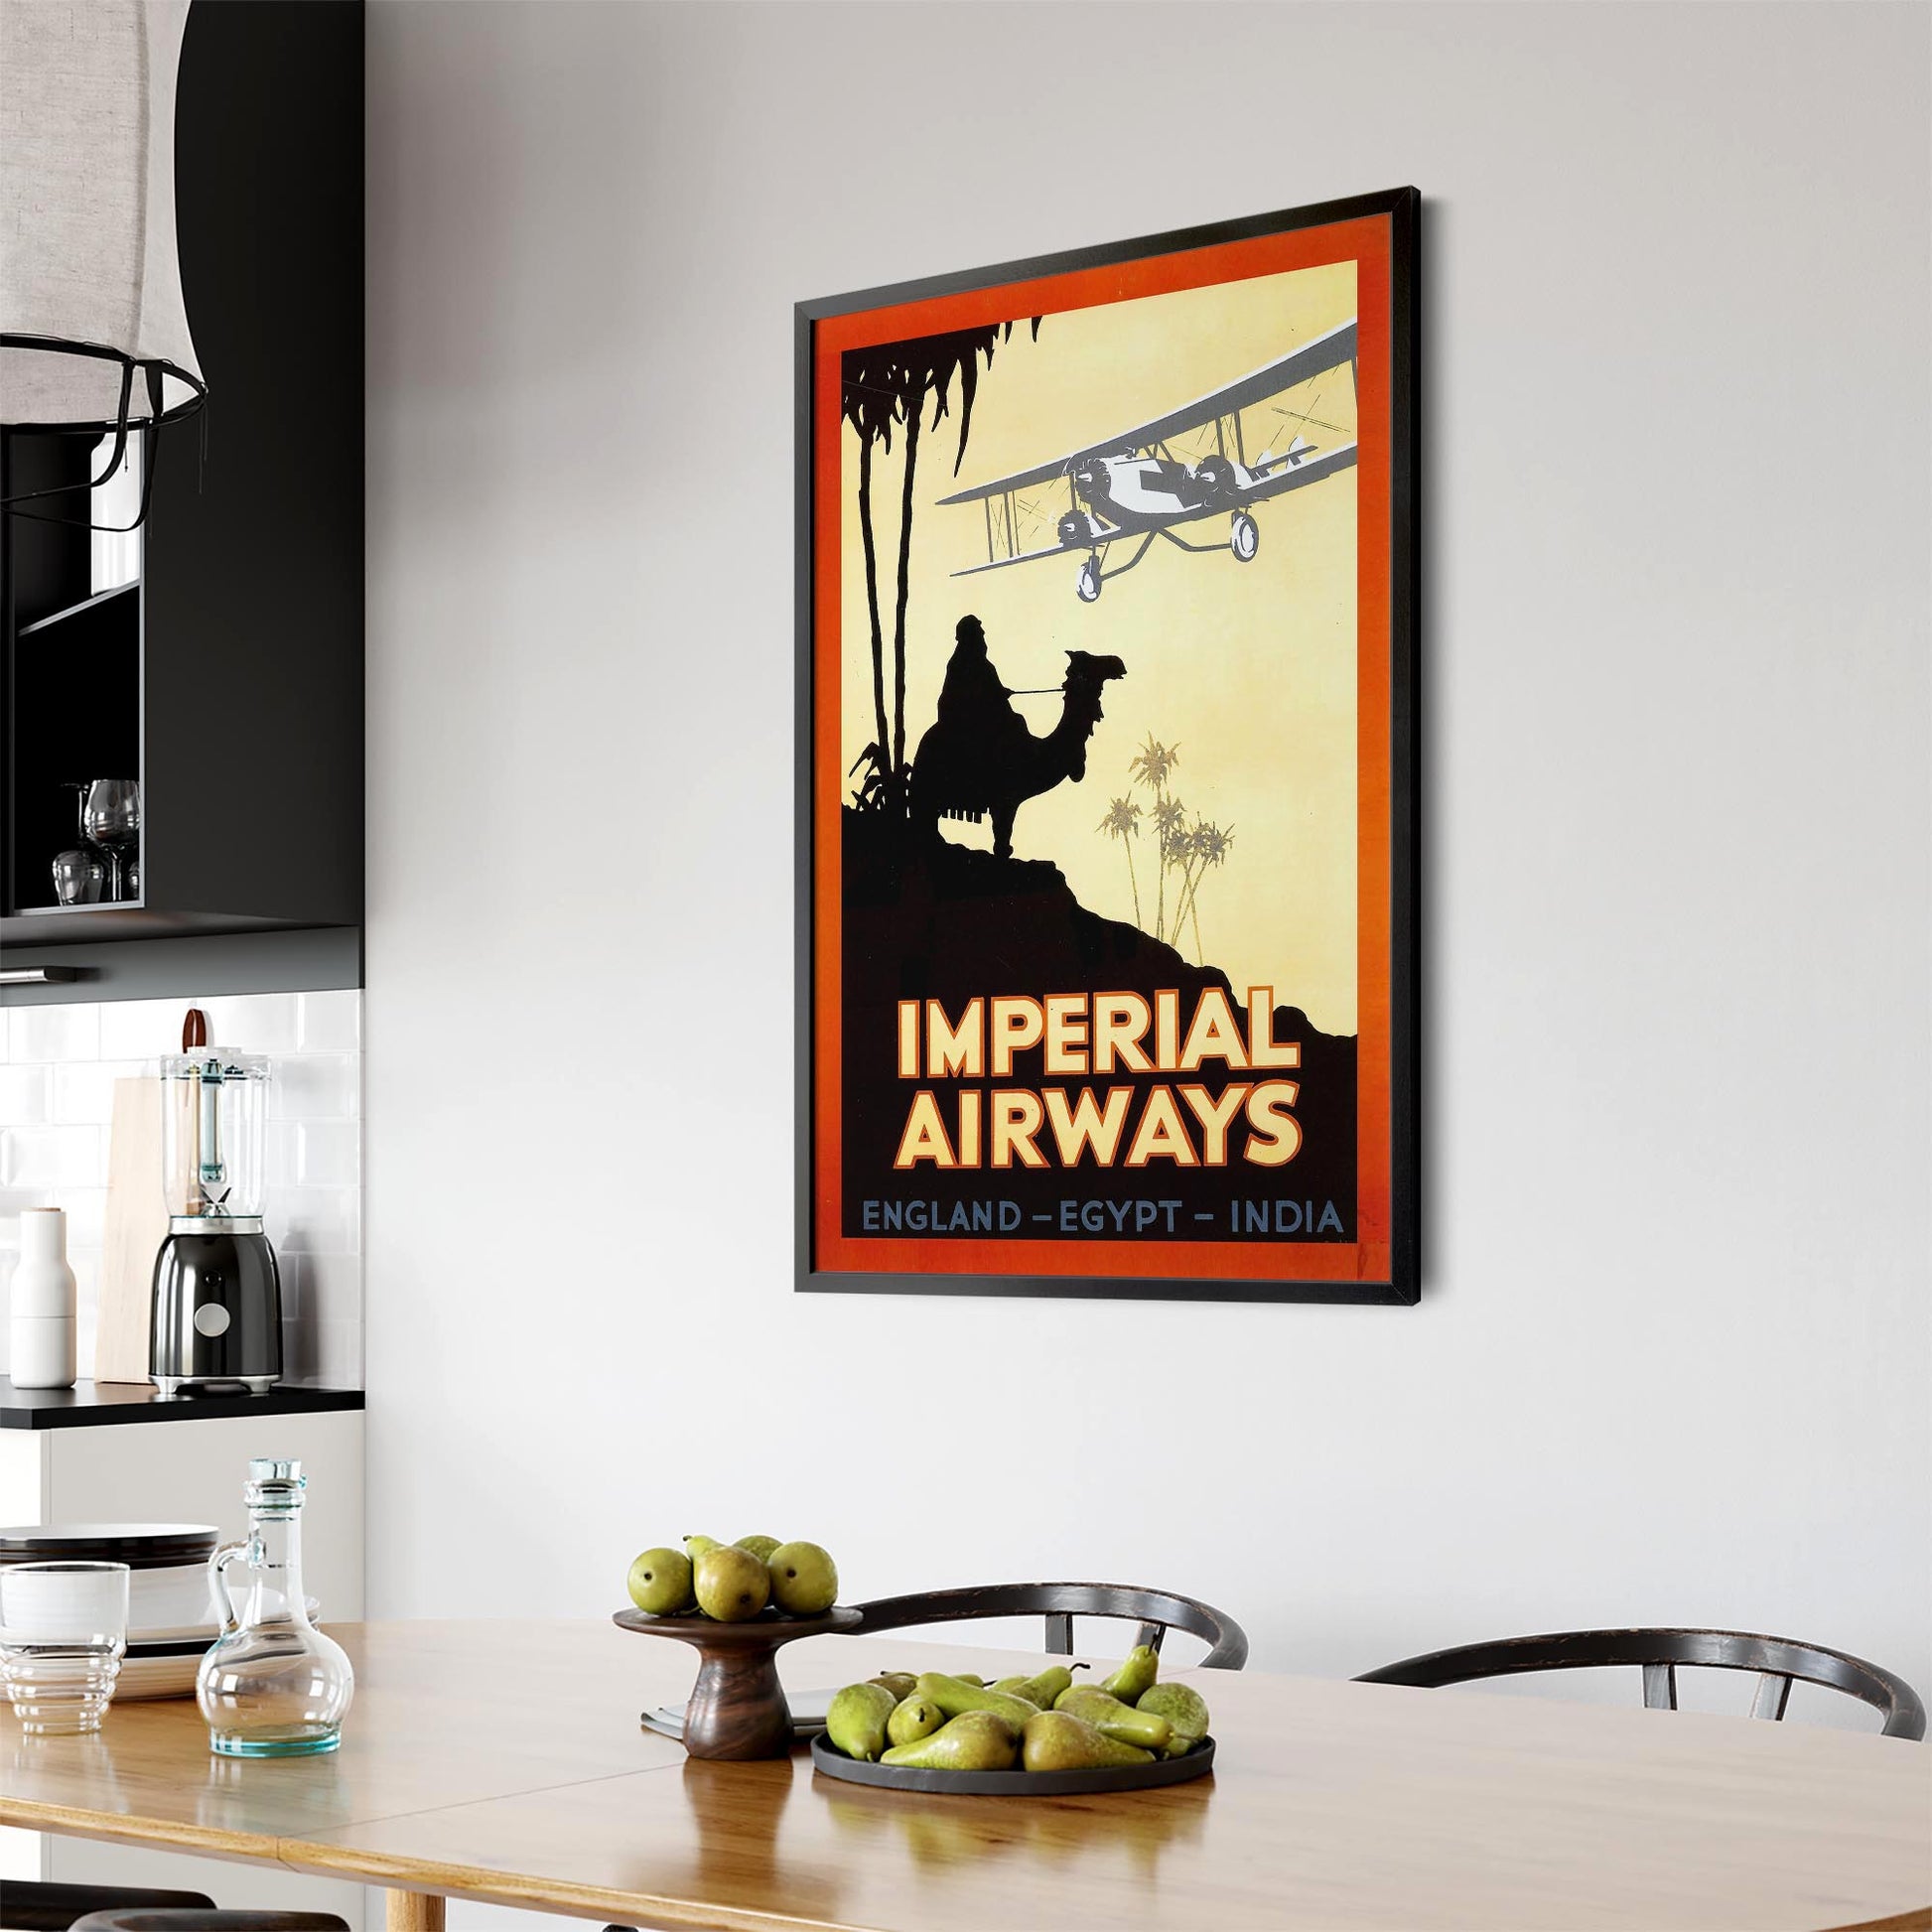 Imperial Airways Vintage Travel Advert Wall Art - The Affordable Art Company